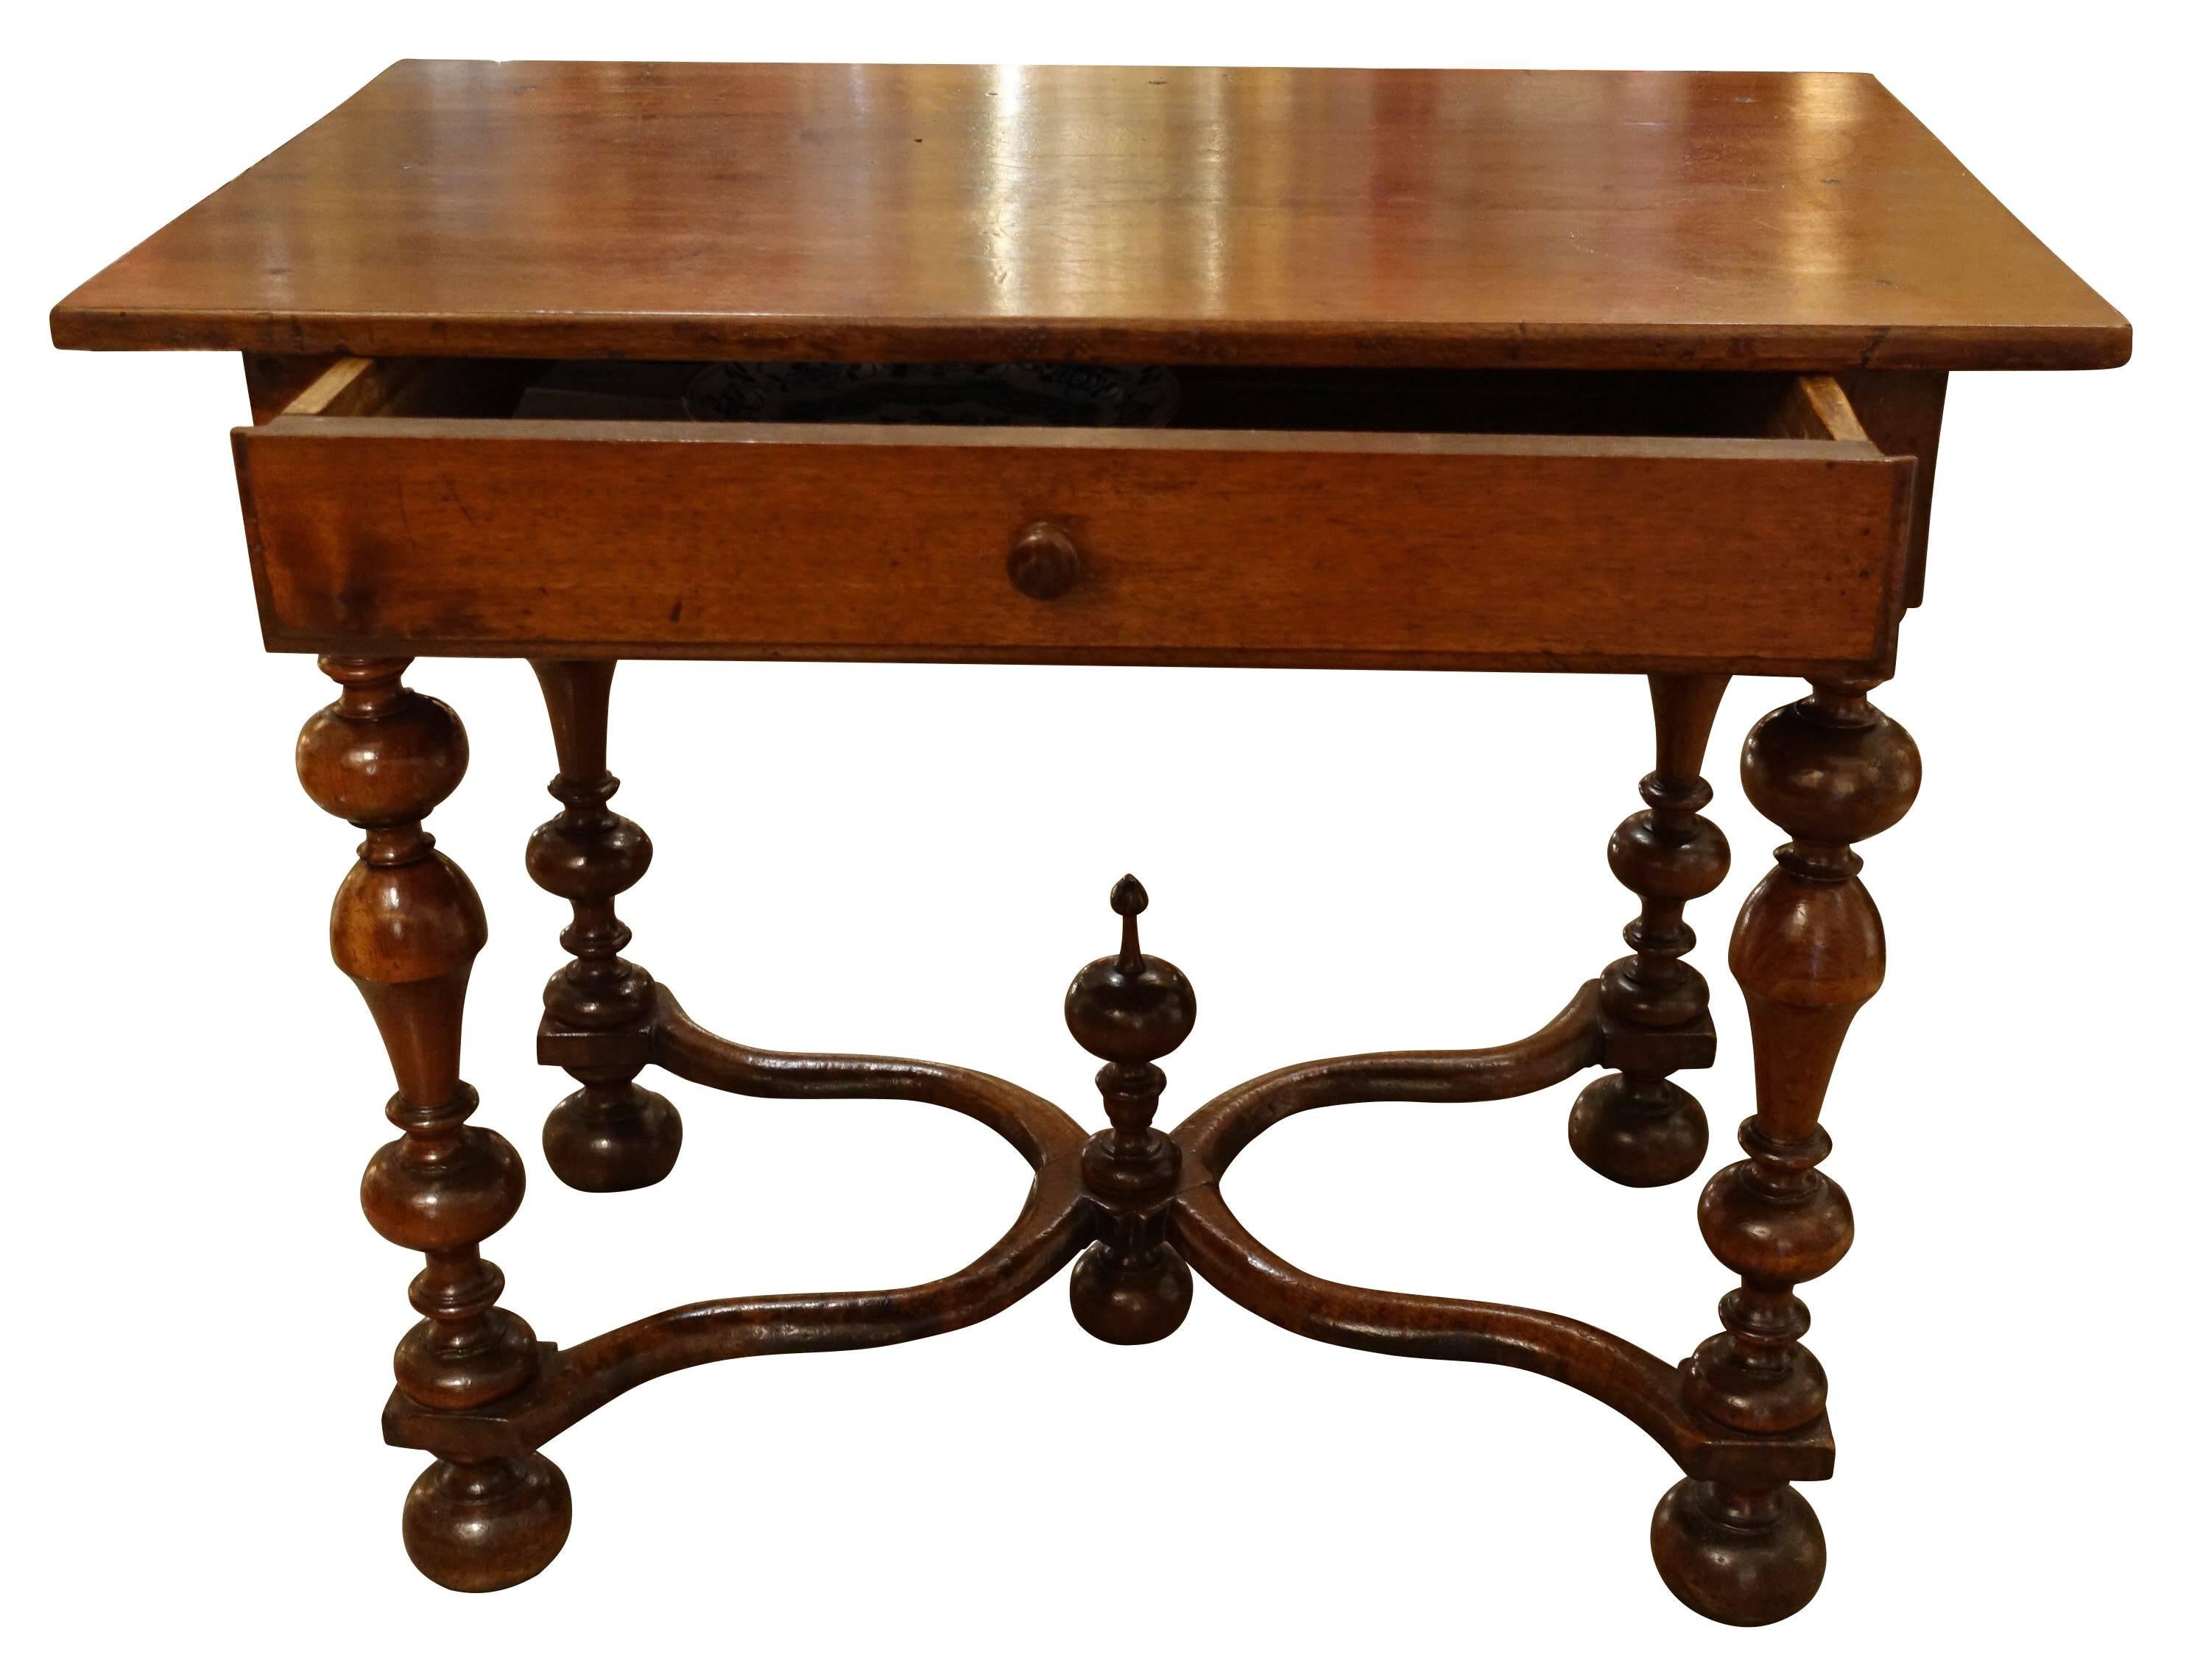 19th century French recently restored walnut large single wide drawer side table.
Spool leg with decorative finial at base.
Criss cross stretcher.
